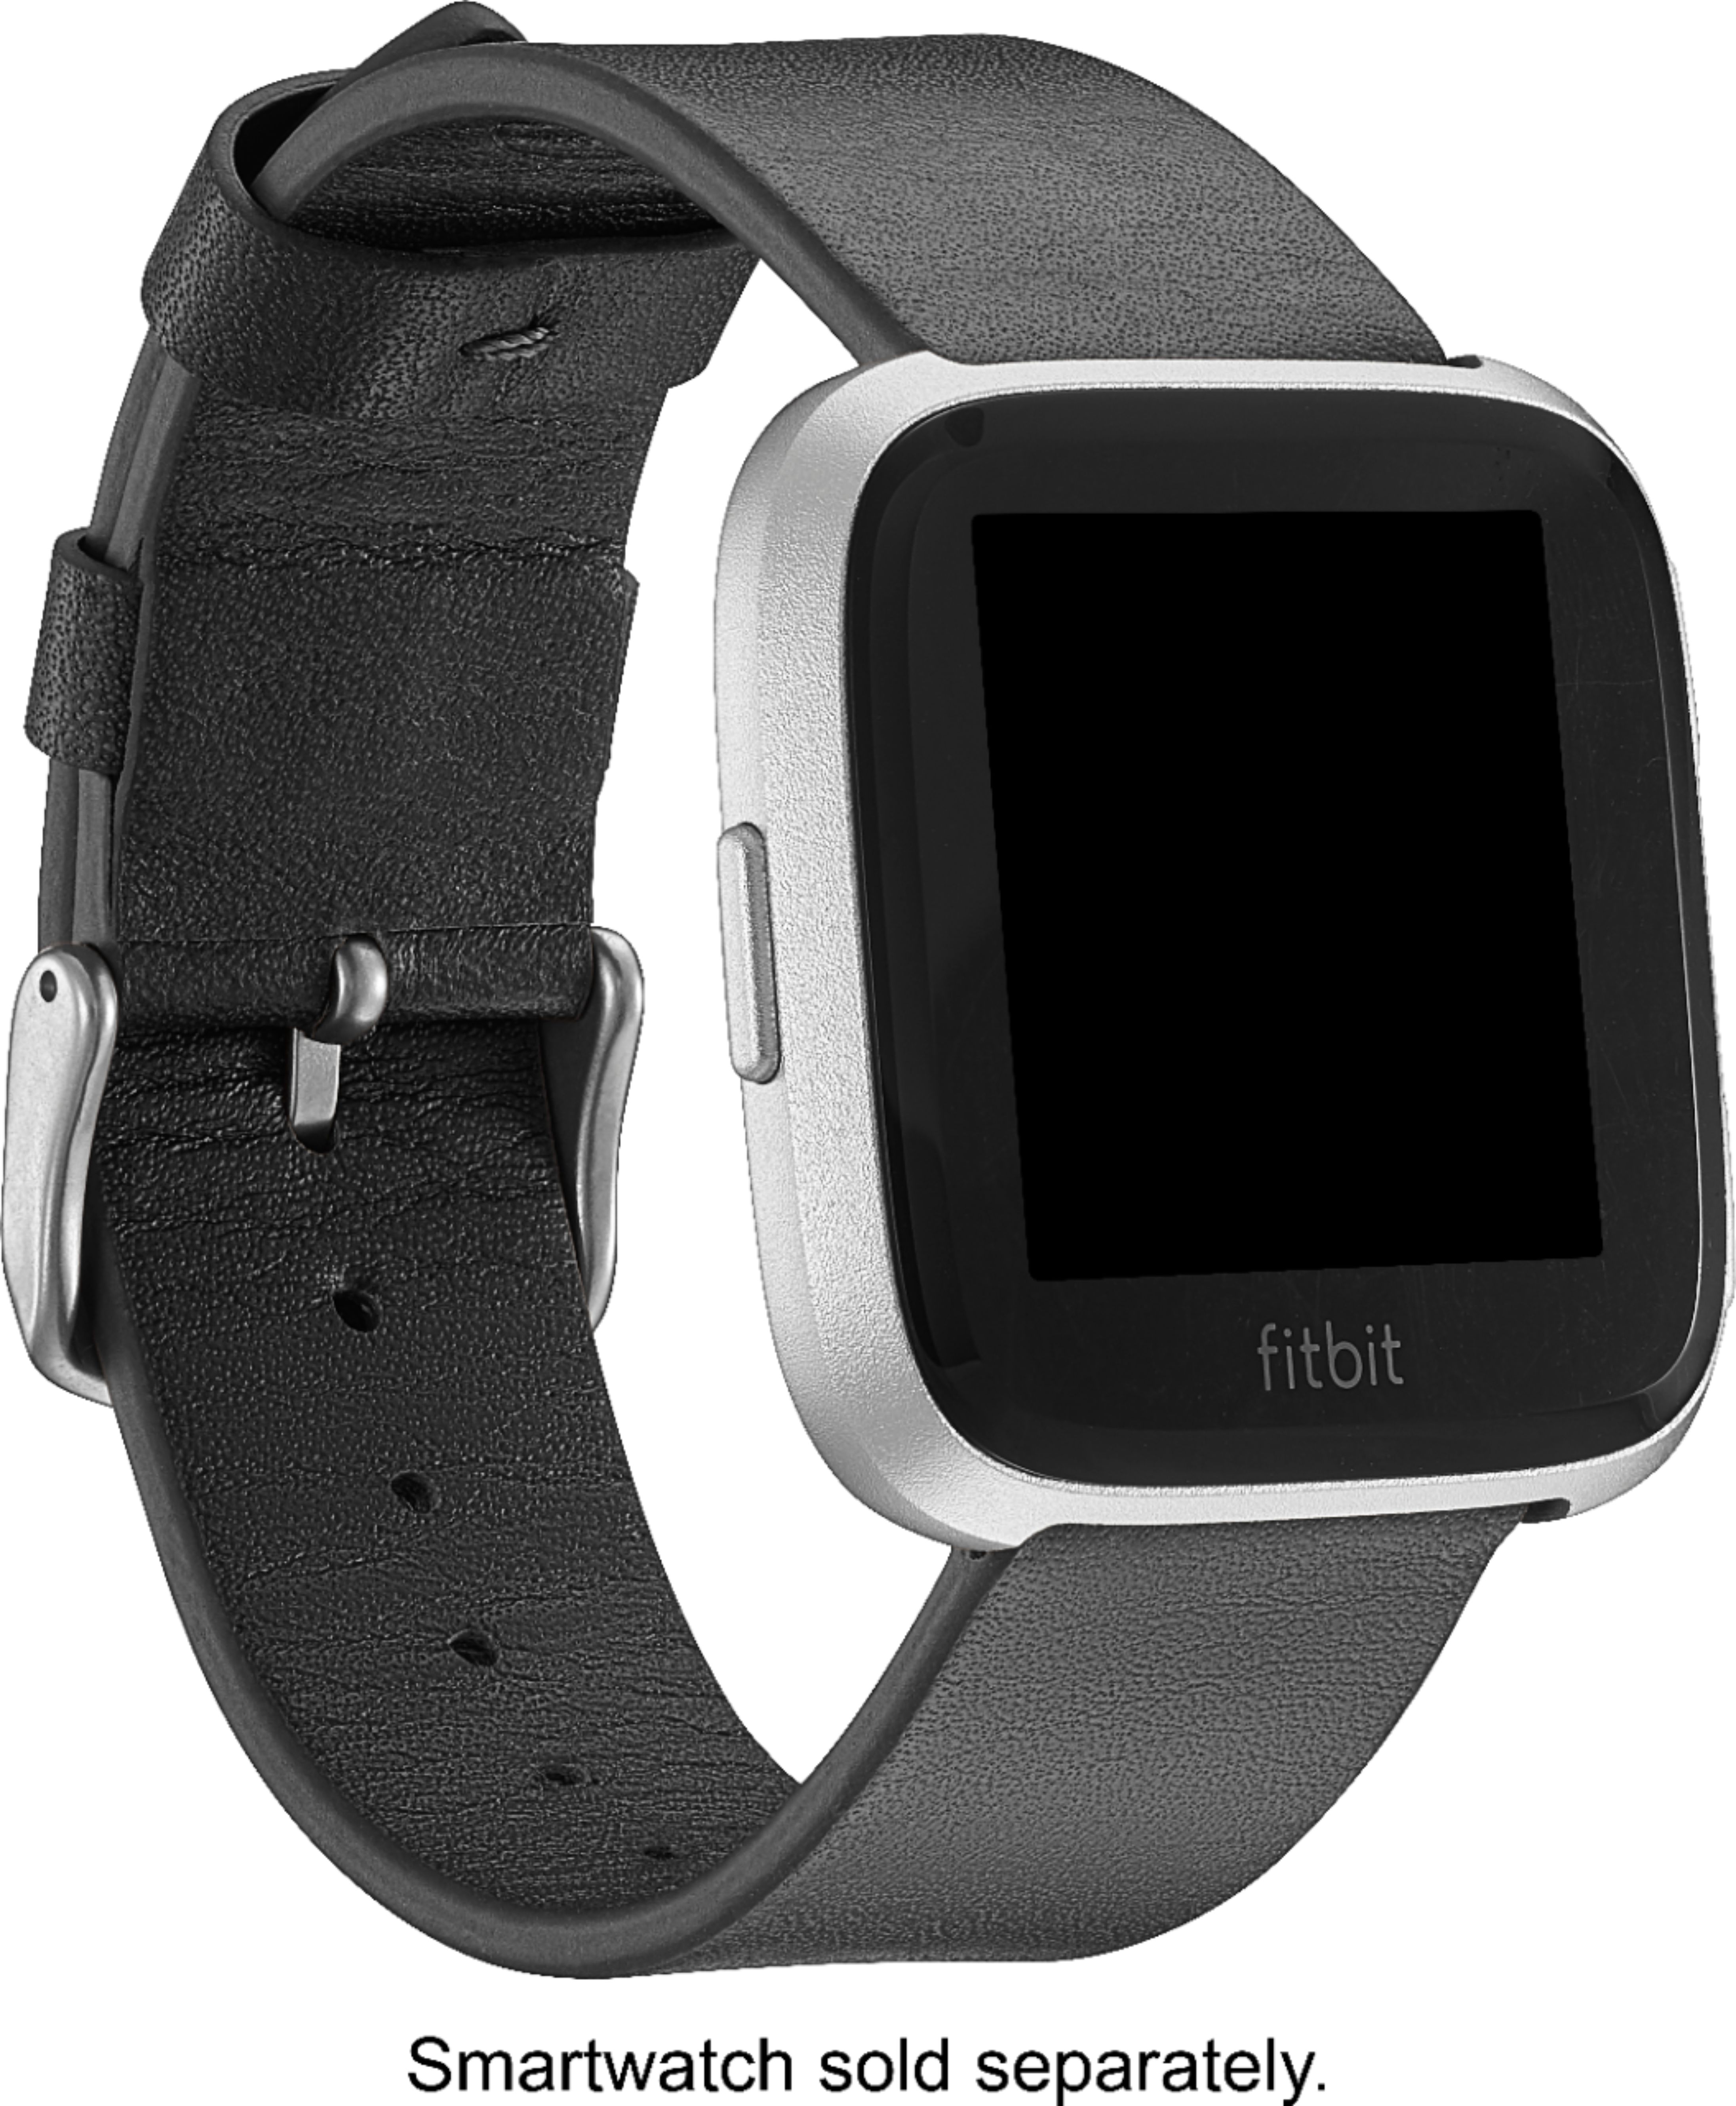 Angle View: Platinum™ - Horween Leather Watch Band for Fitbit Versa 2, Fitbit Versa and Fitbit Versa Lite - Black